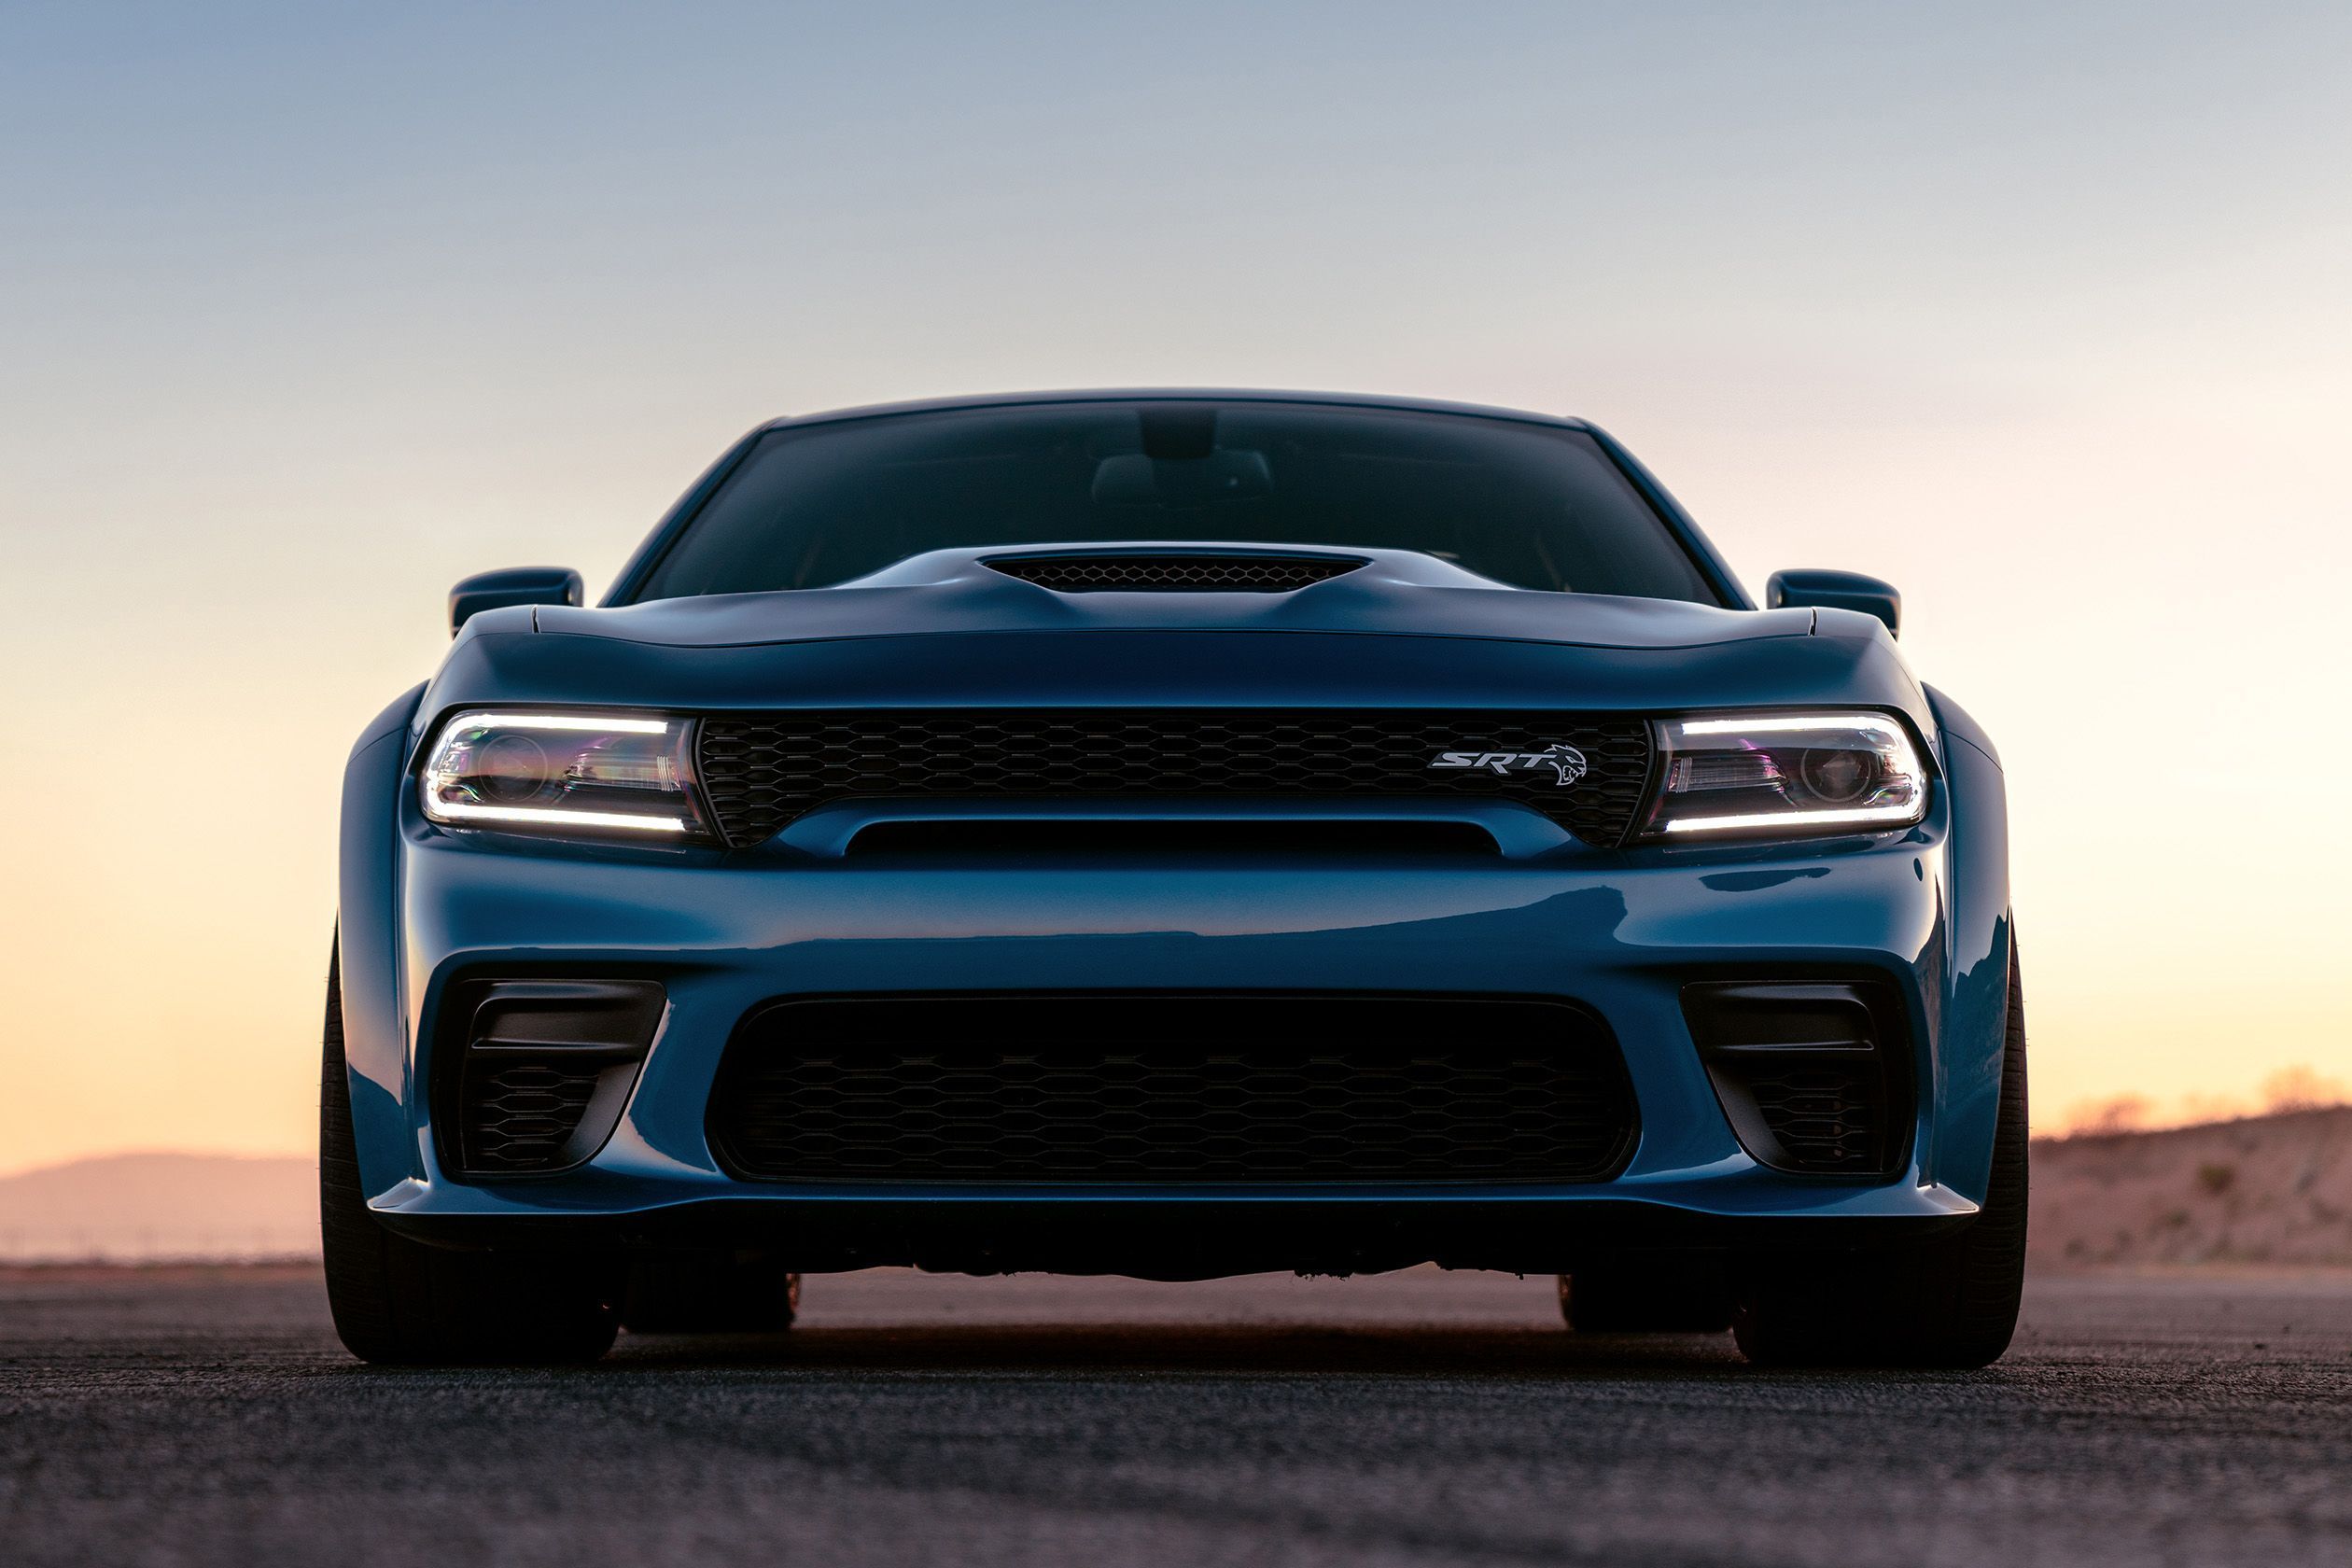 Dodge Charger SRT Hellcat Widebody Picture, Specs, and HP